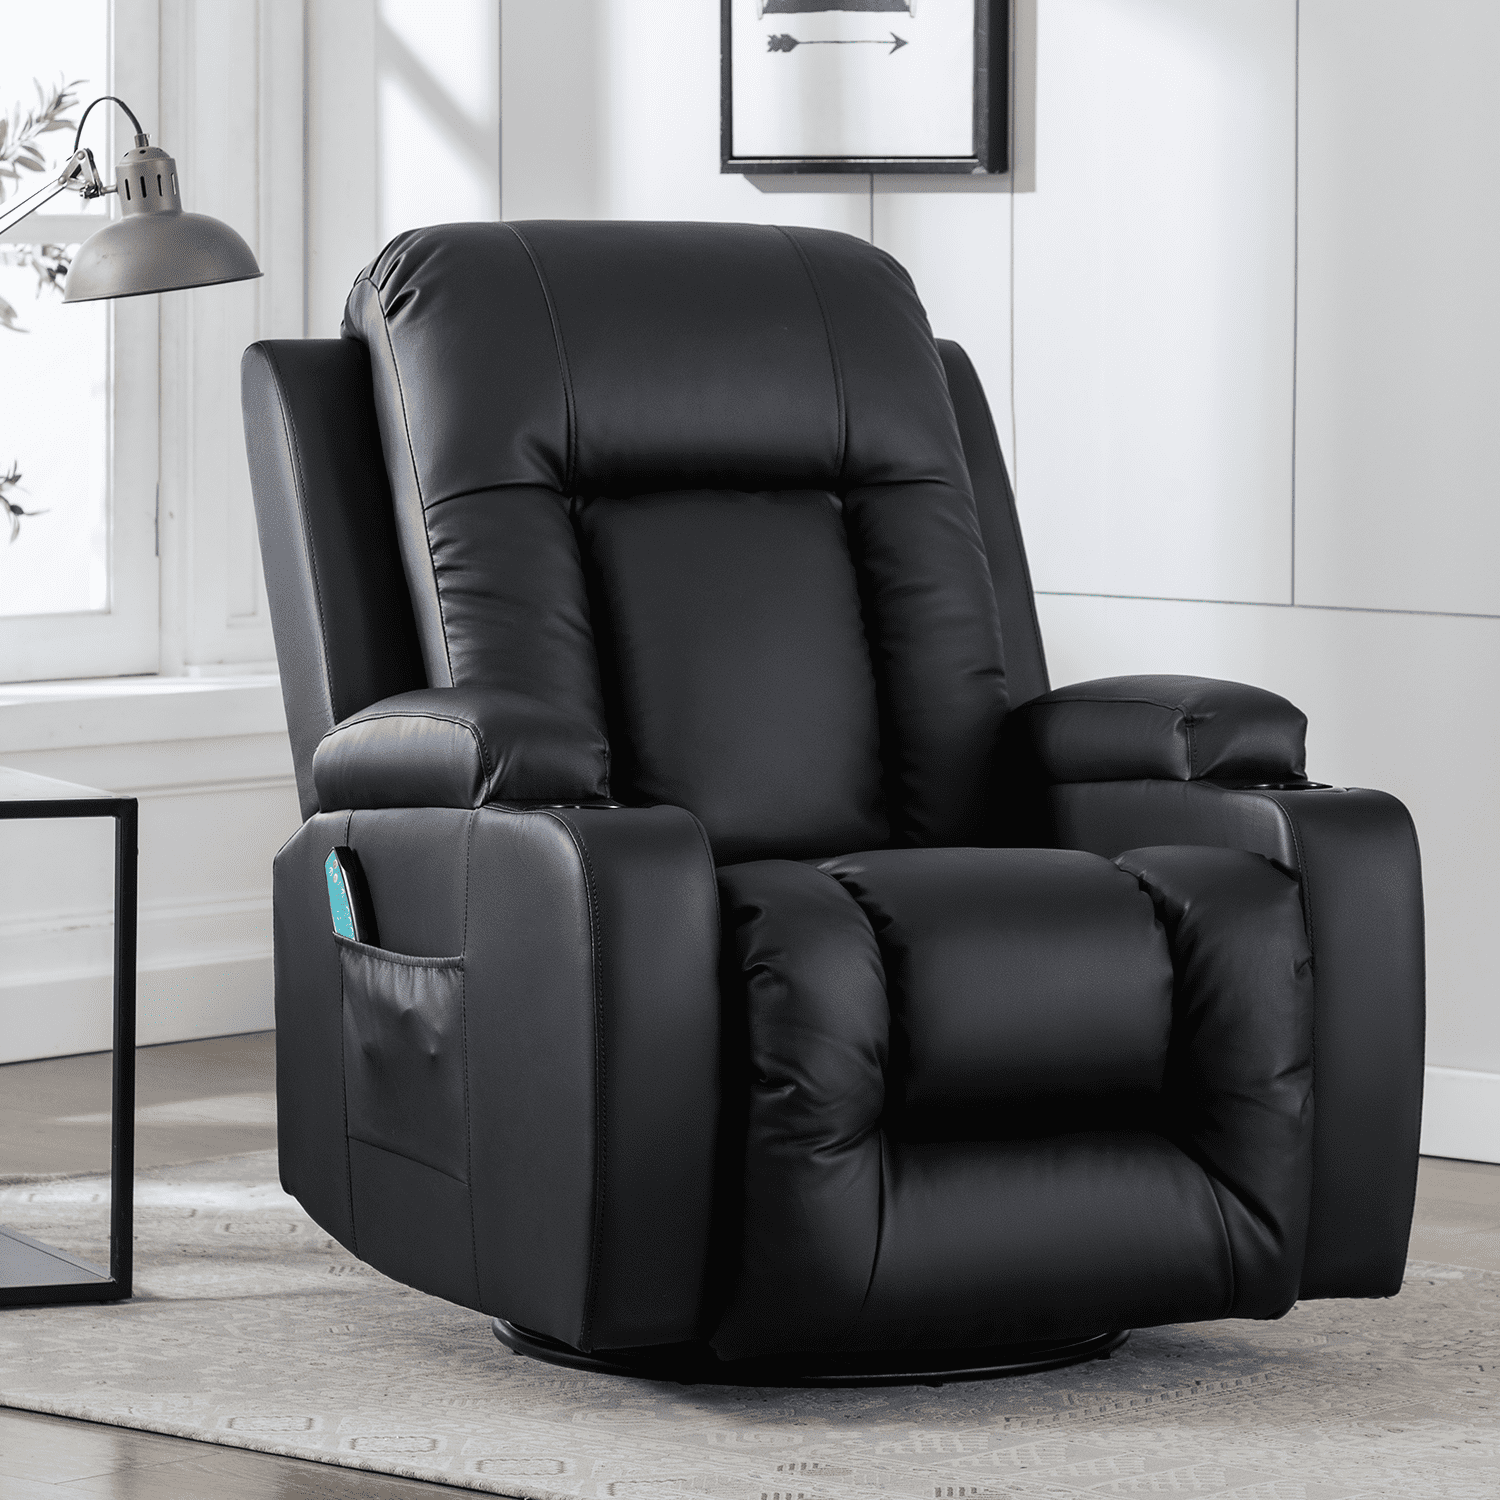 Swivel Leather Reclining Sofa, Leather Rocking Recliner Chair